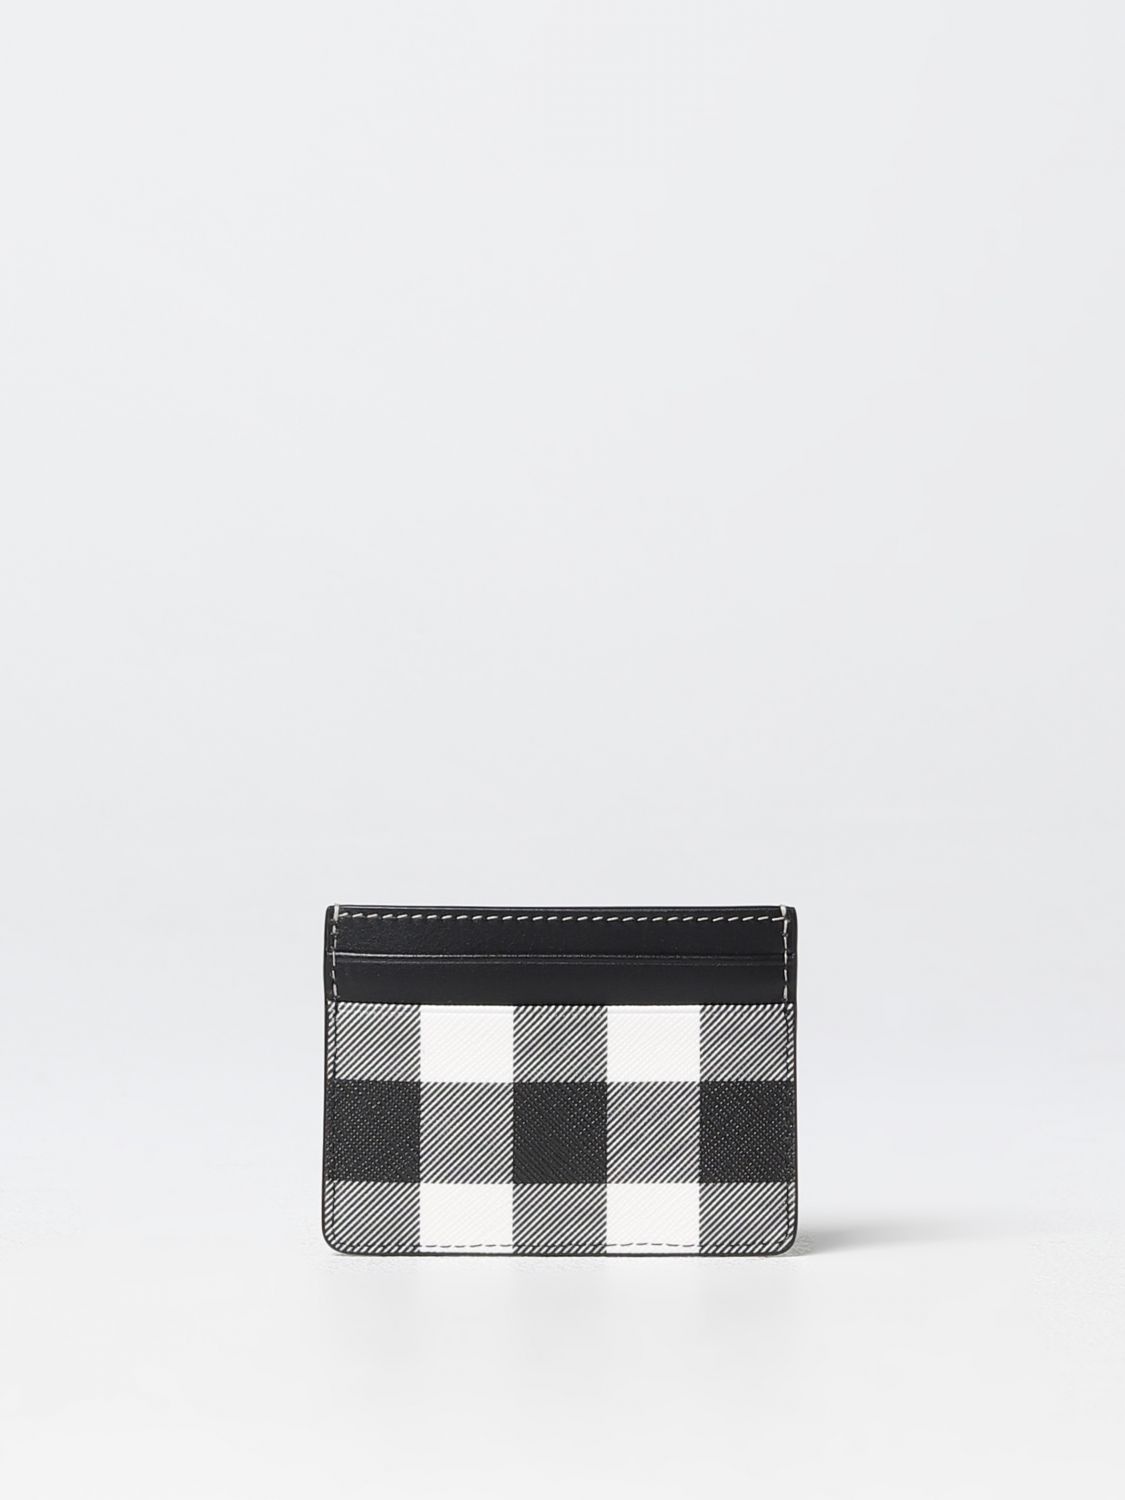 BURBERRY: coin purse in leather and coated fabric - Beige